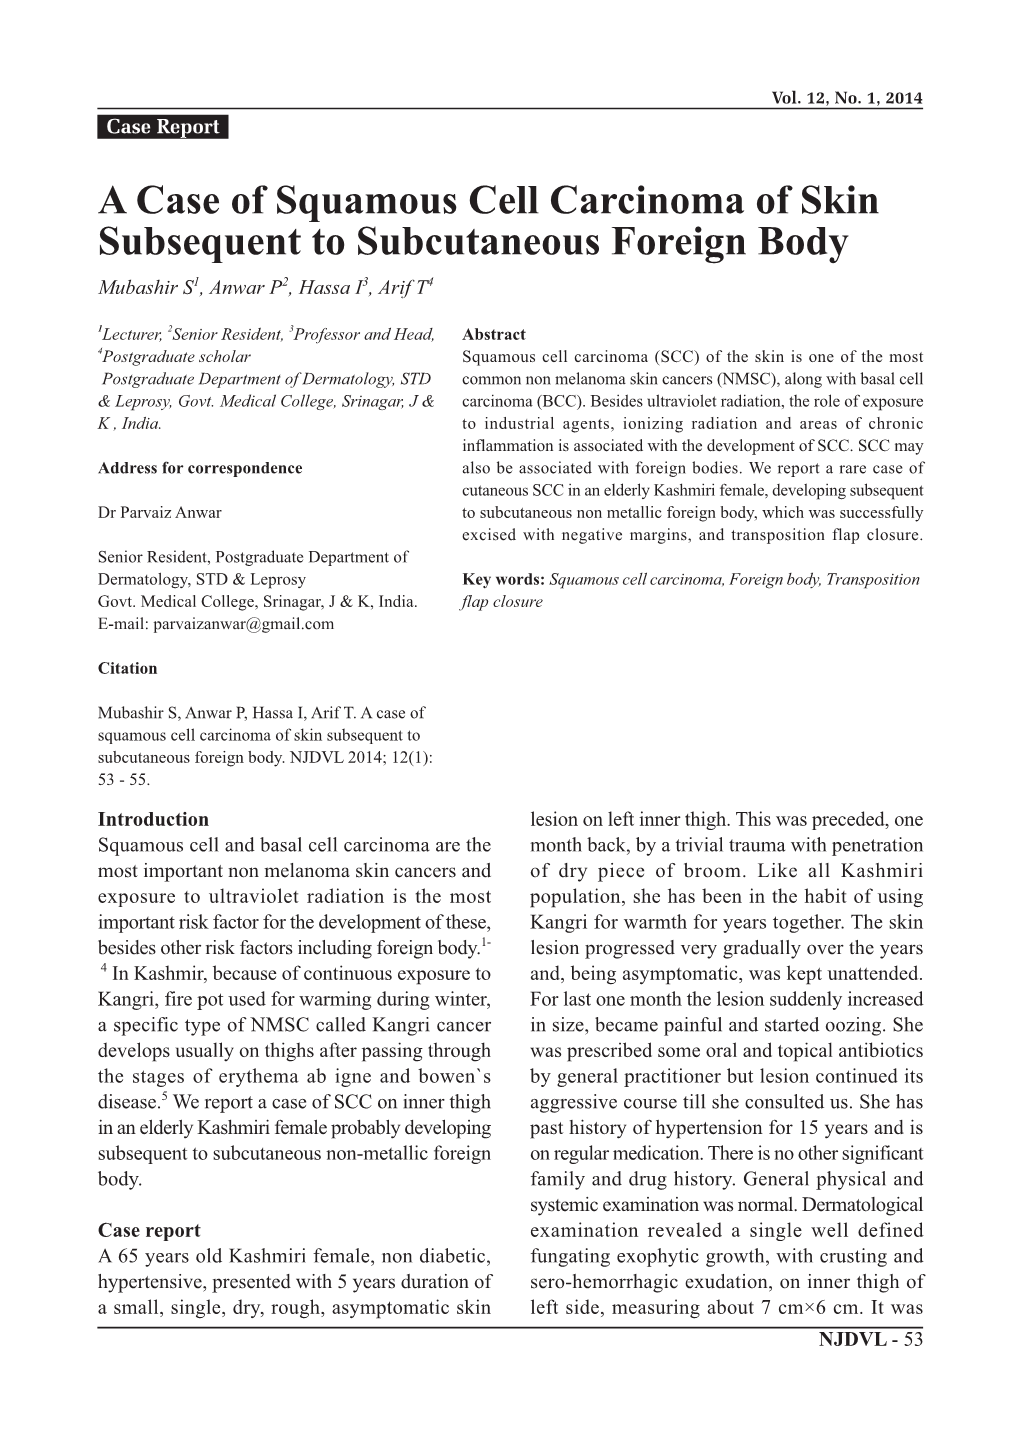 A Case of Squamous Cell Carcinoma of Skin Subsequent to Subcutaneous Foreign Body Mubashir S1, Anwar P2, Hassa I3, Arif T4